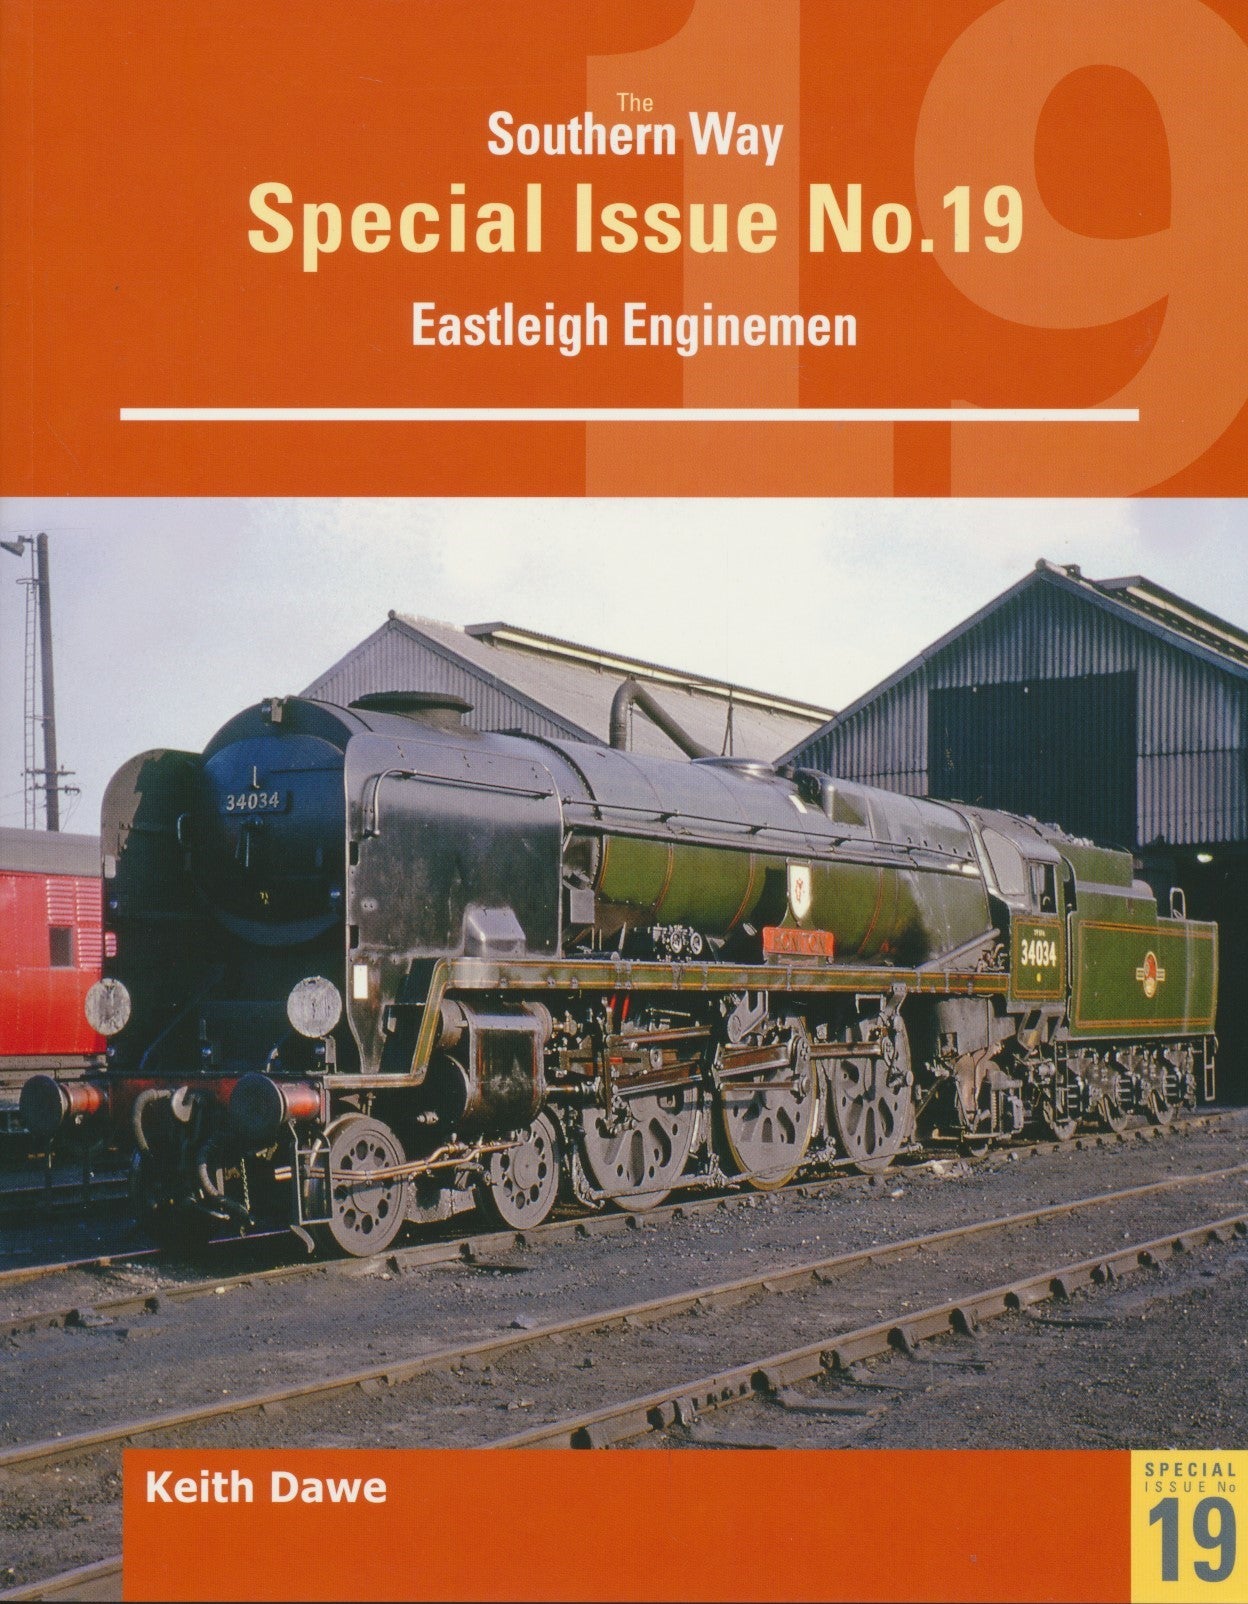 The Southern Way Special Issue No. 19: Eastleigh Enginemen